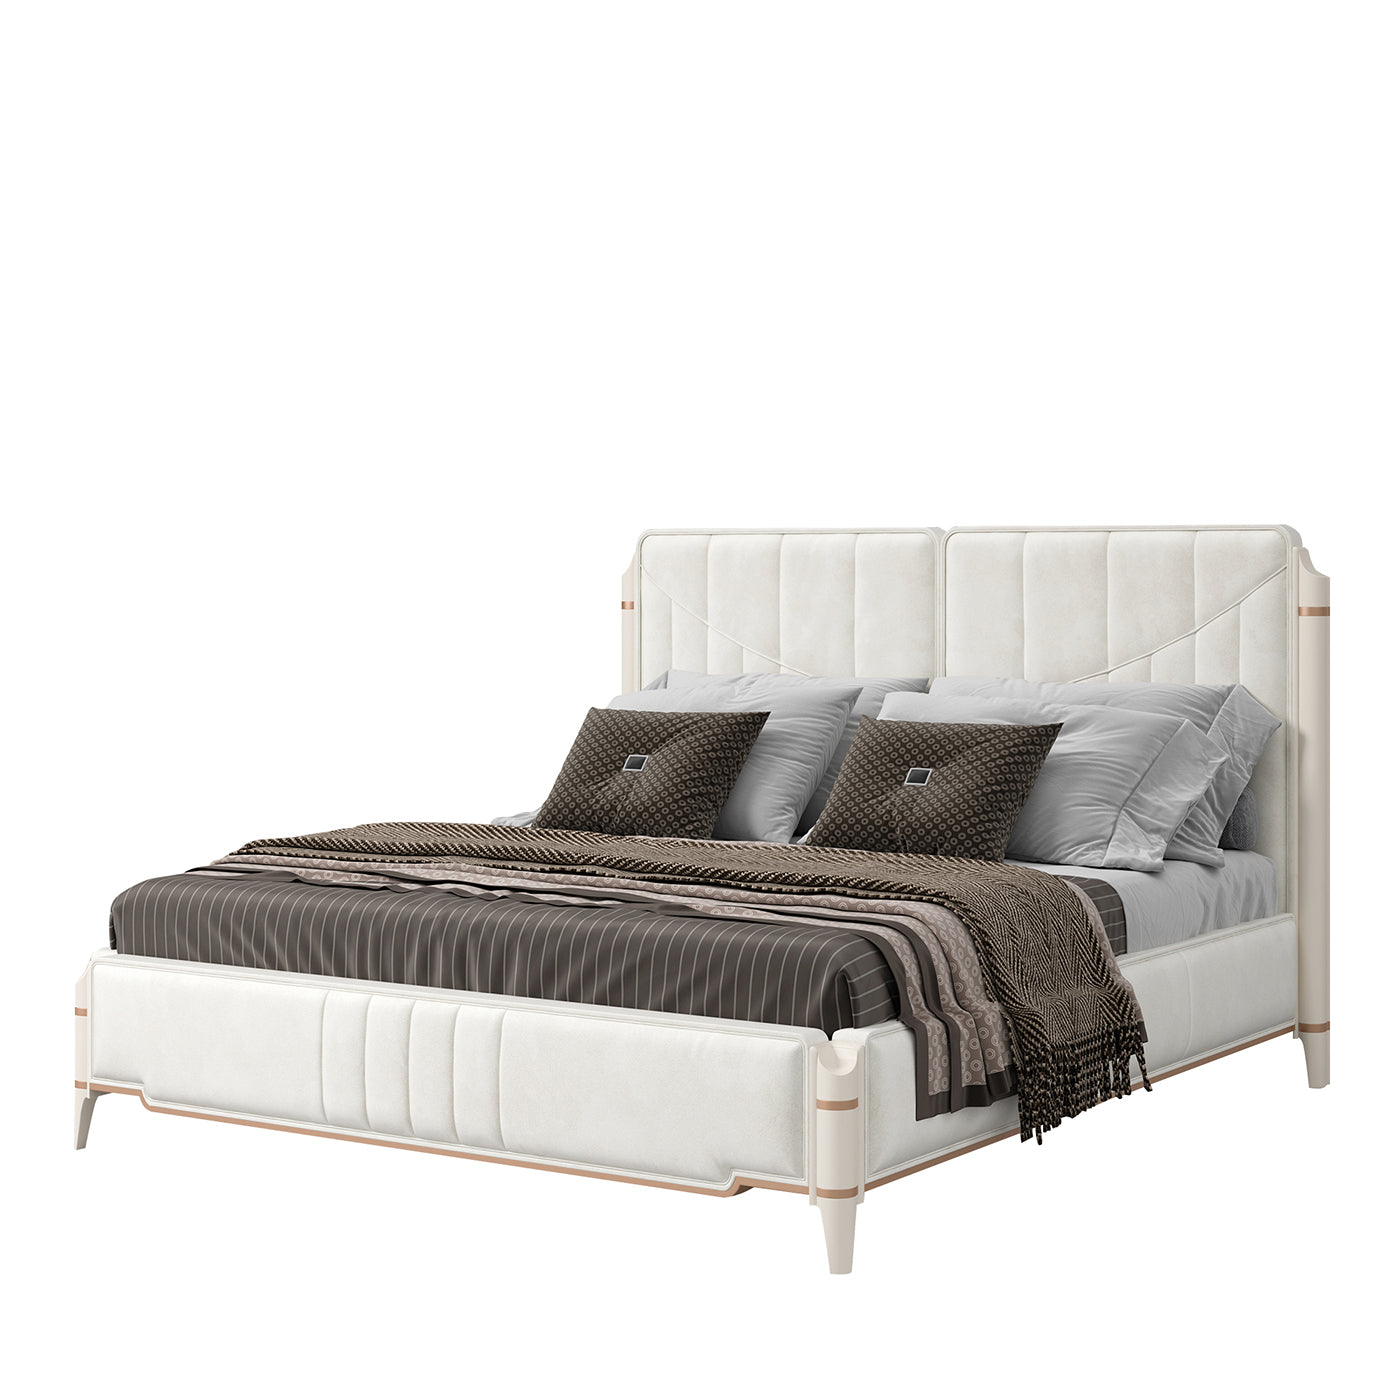 James Beige Double Bed - Main view